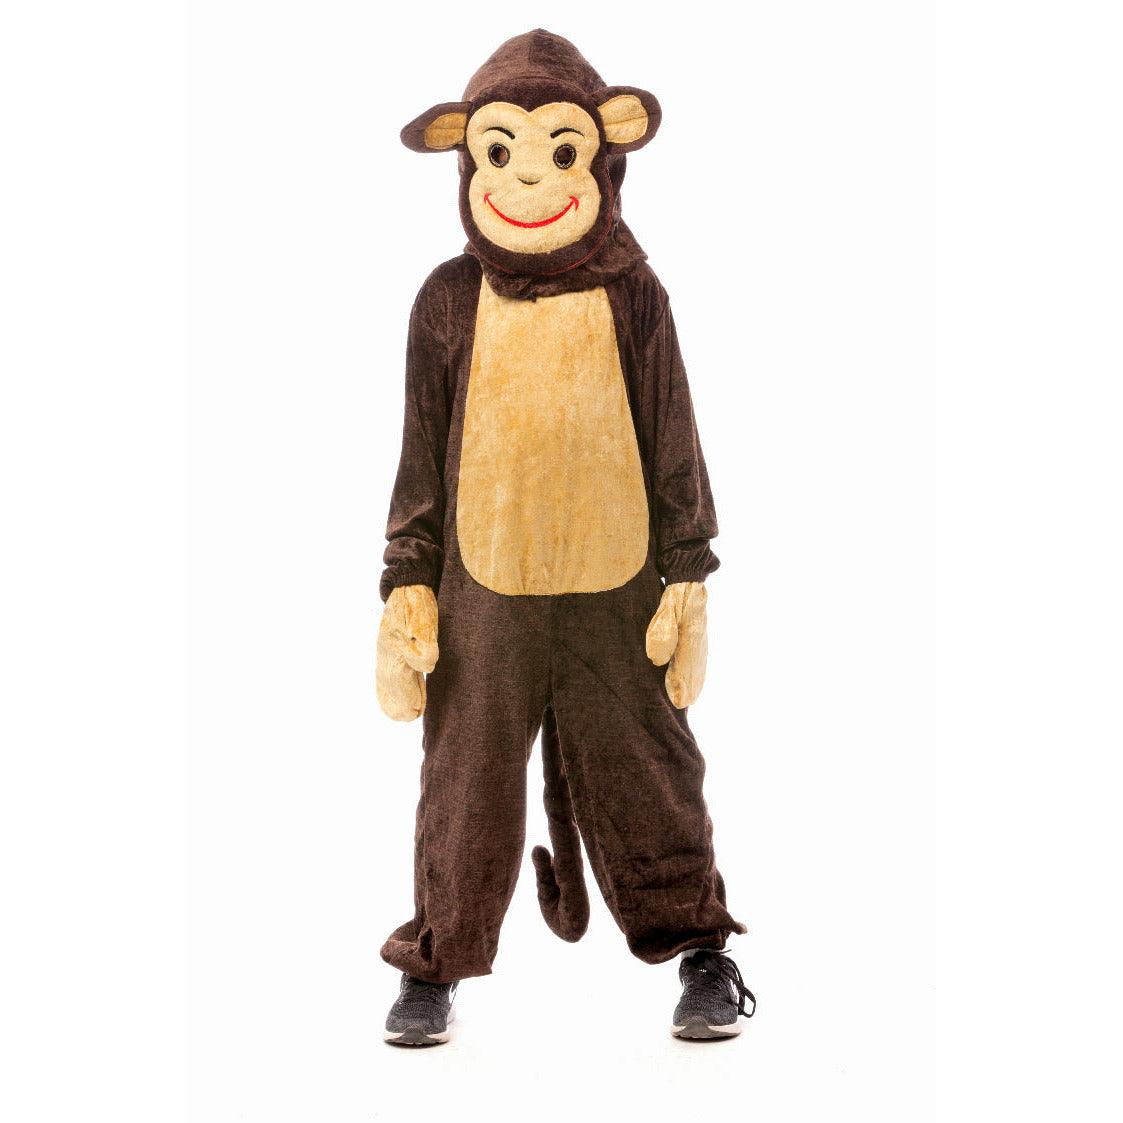 Monkey Costume - Ourkids - M&A